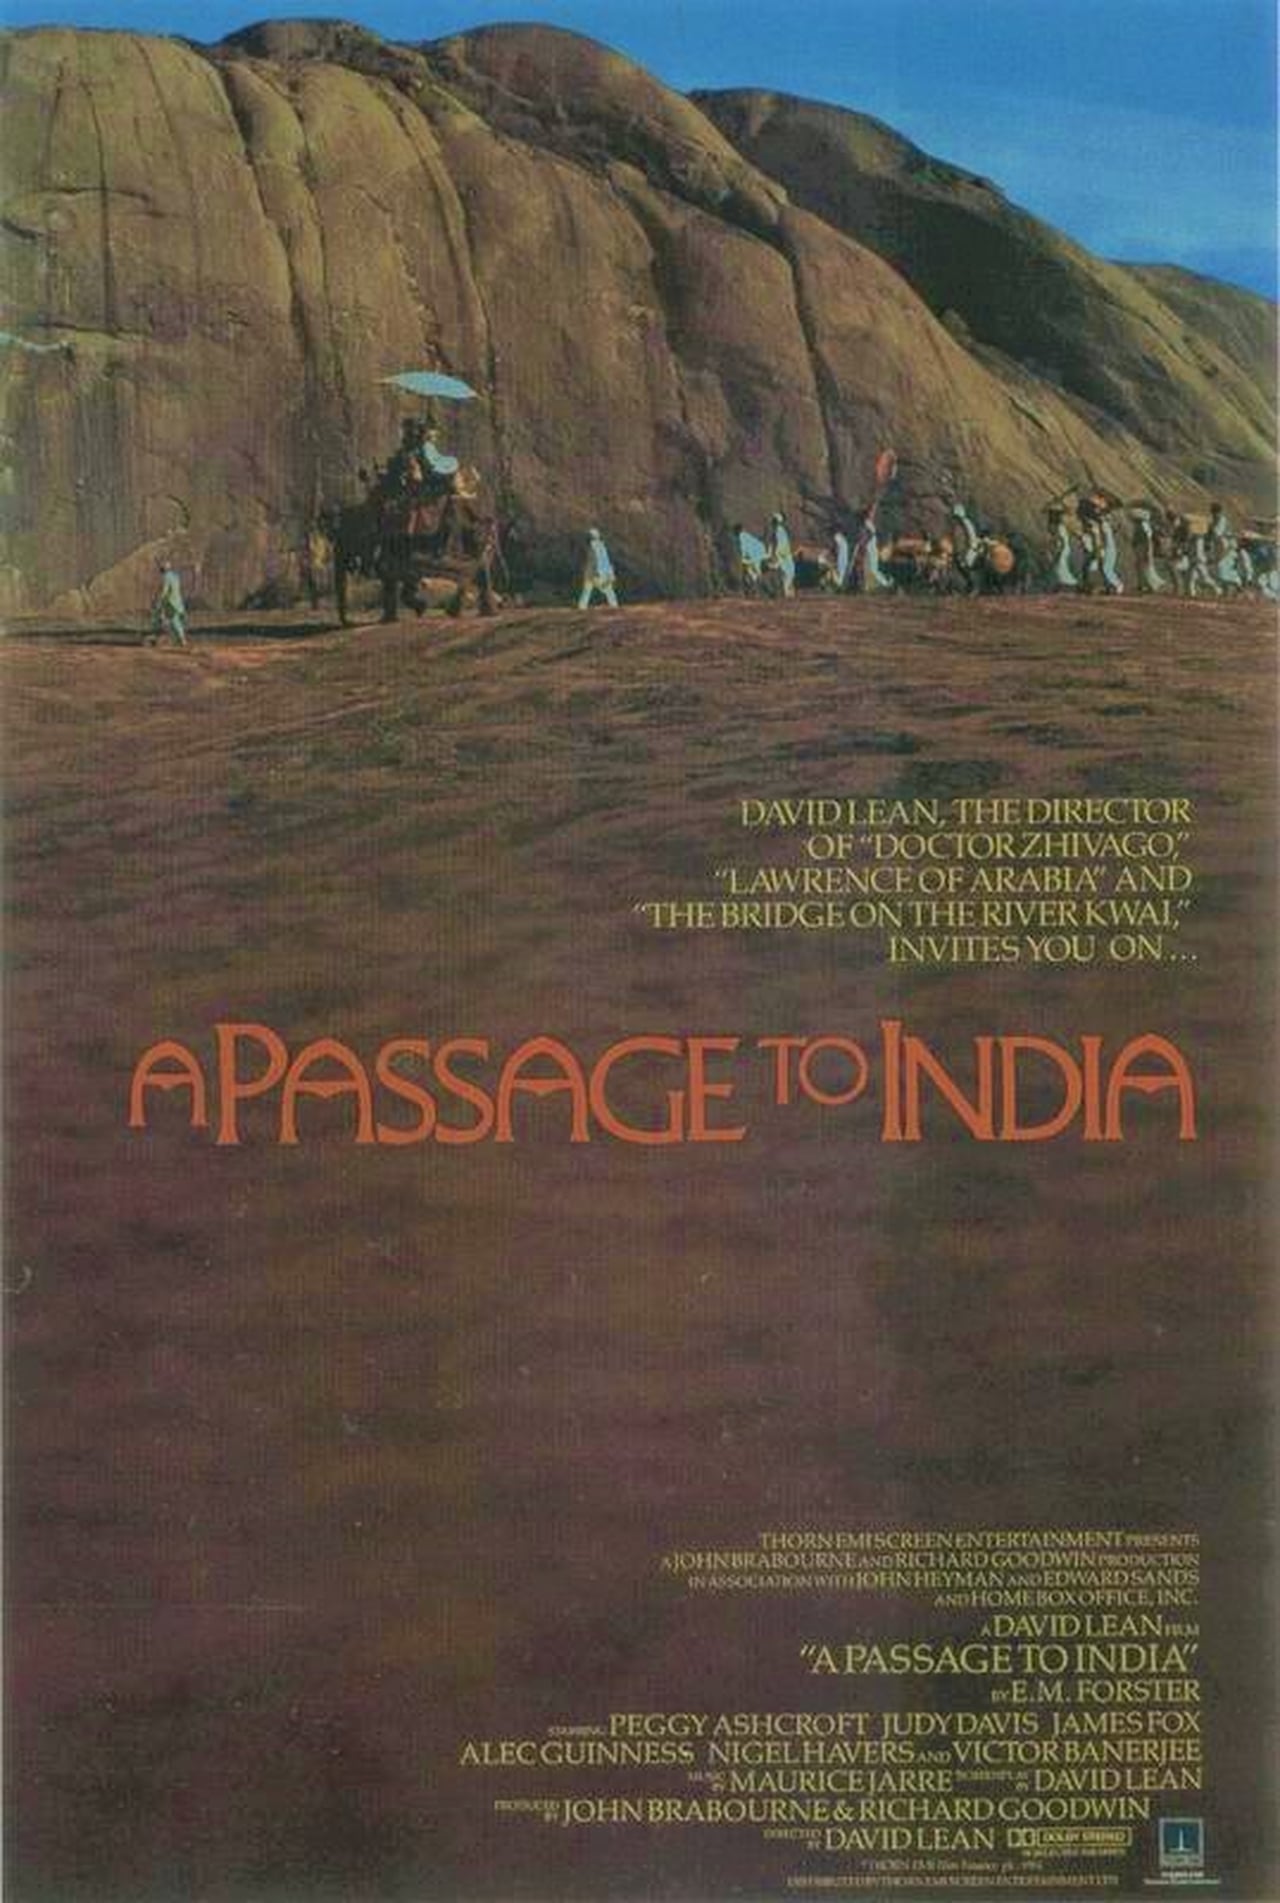 a passage to india full text